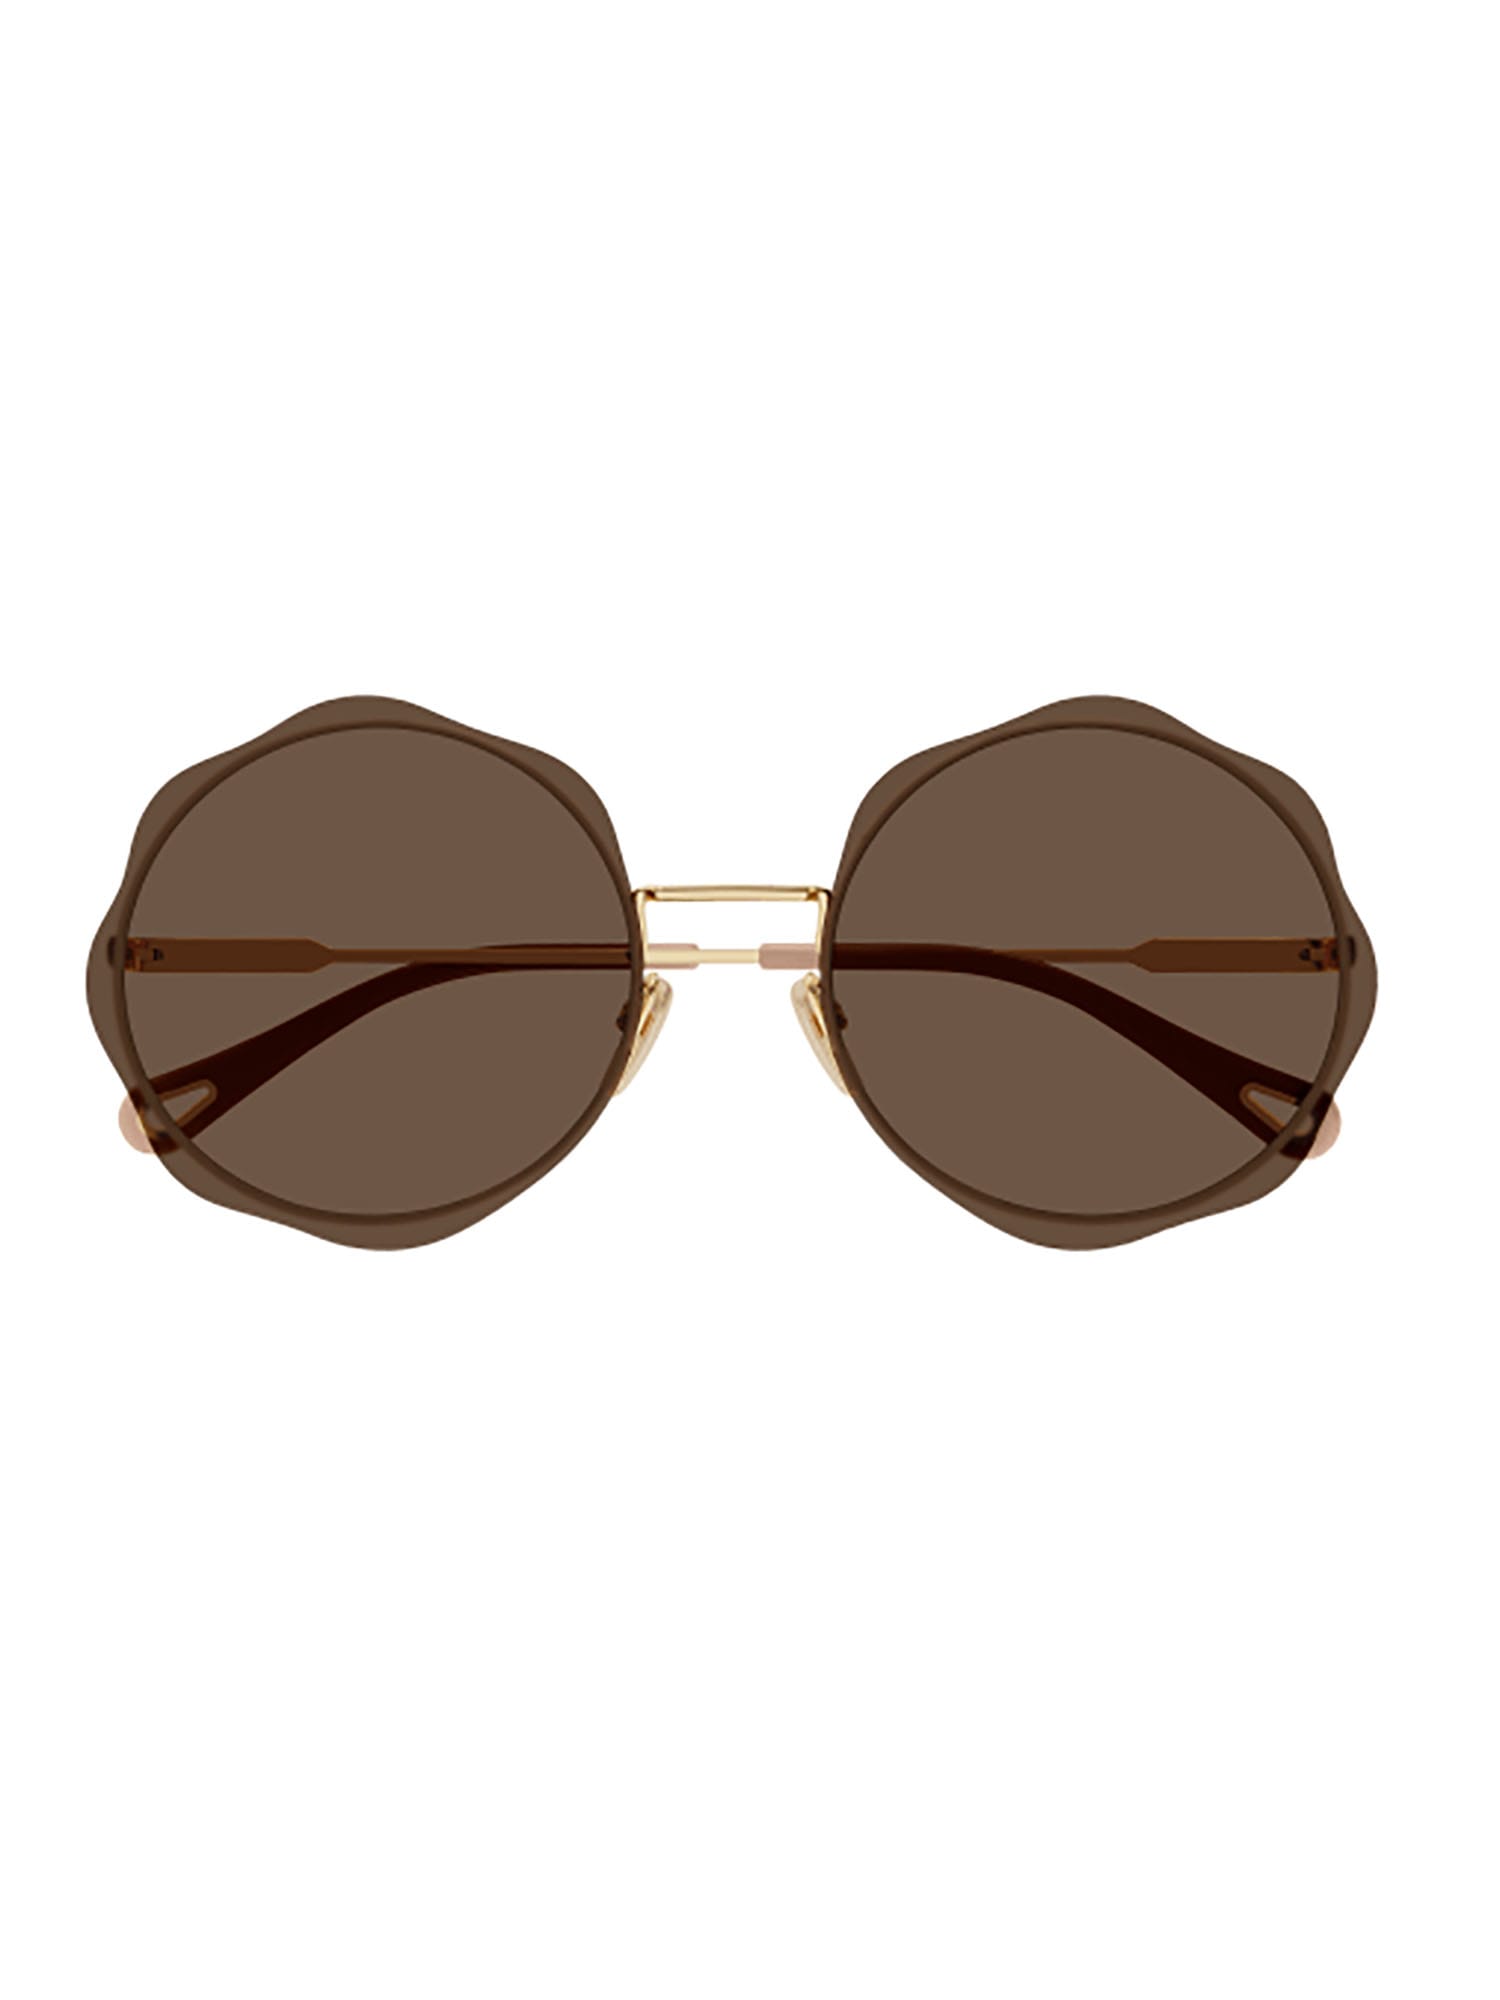 Chloé Ch0202s Sunglasses In Gold Gold Brown